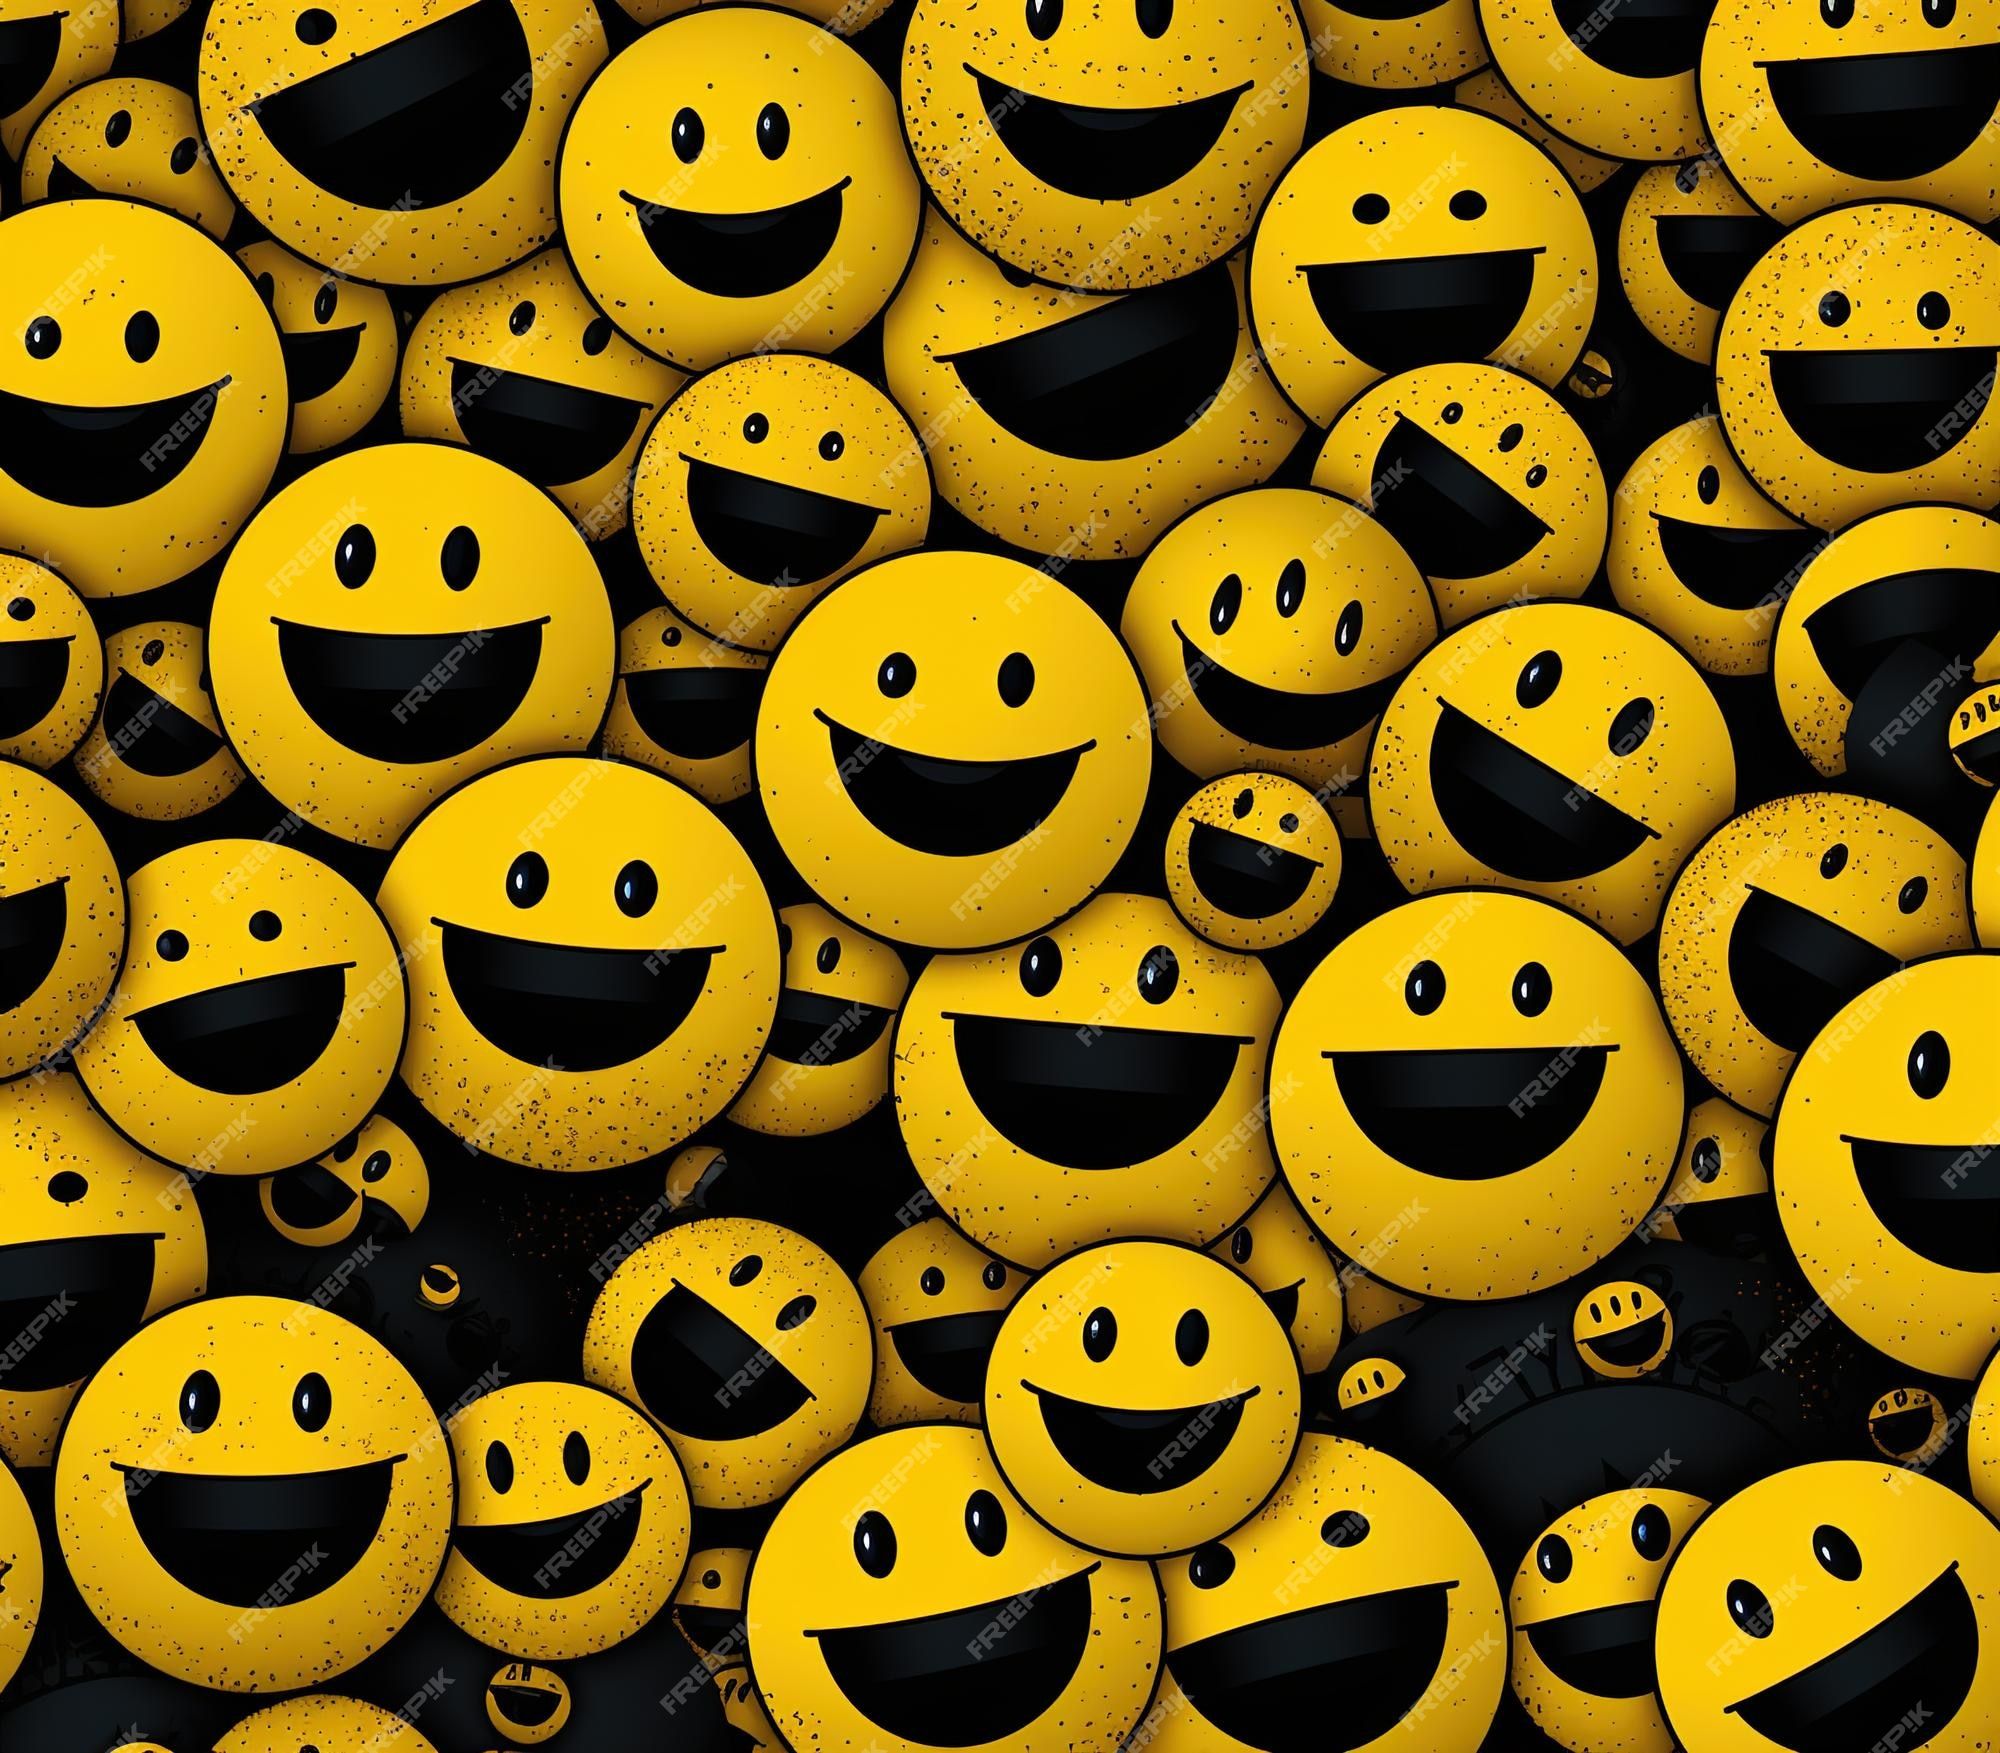 Many yellow smiley faces with black eyes and mouth are piled together on a black background. - Smiley